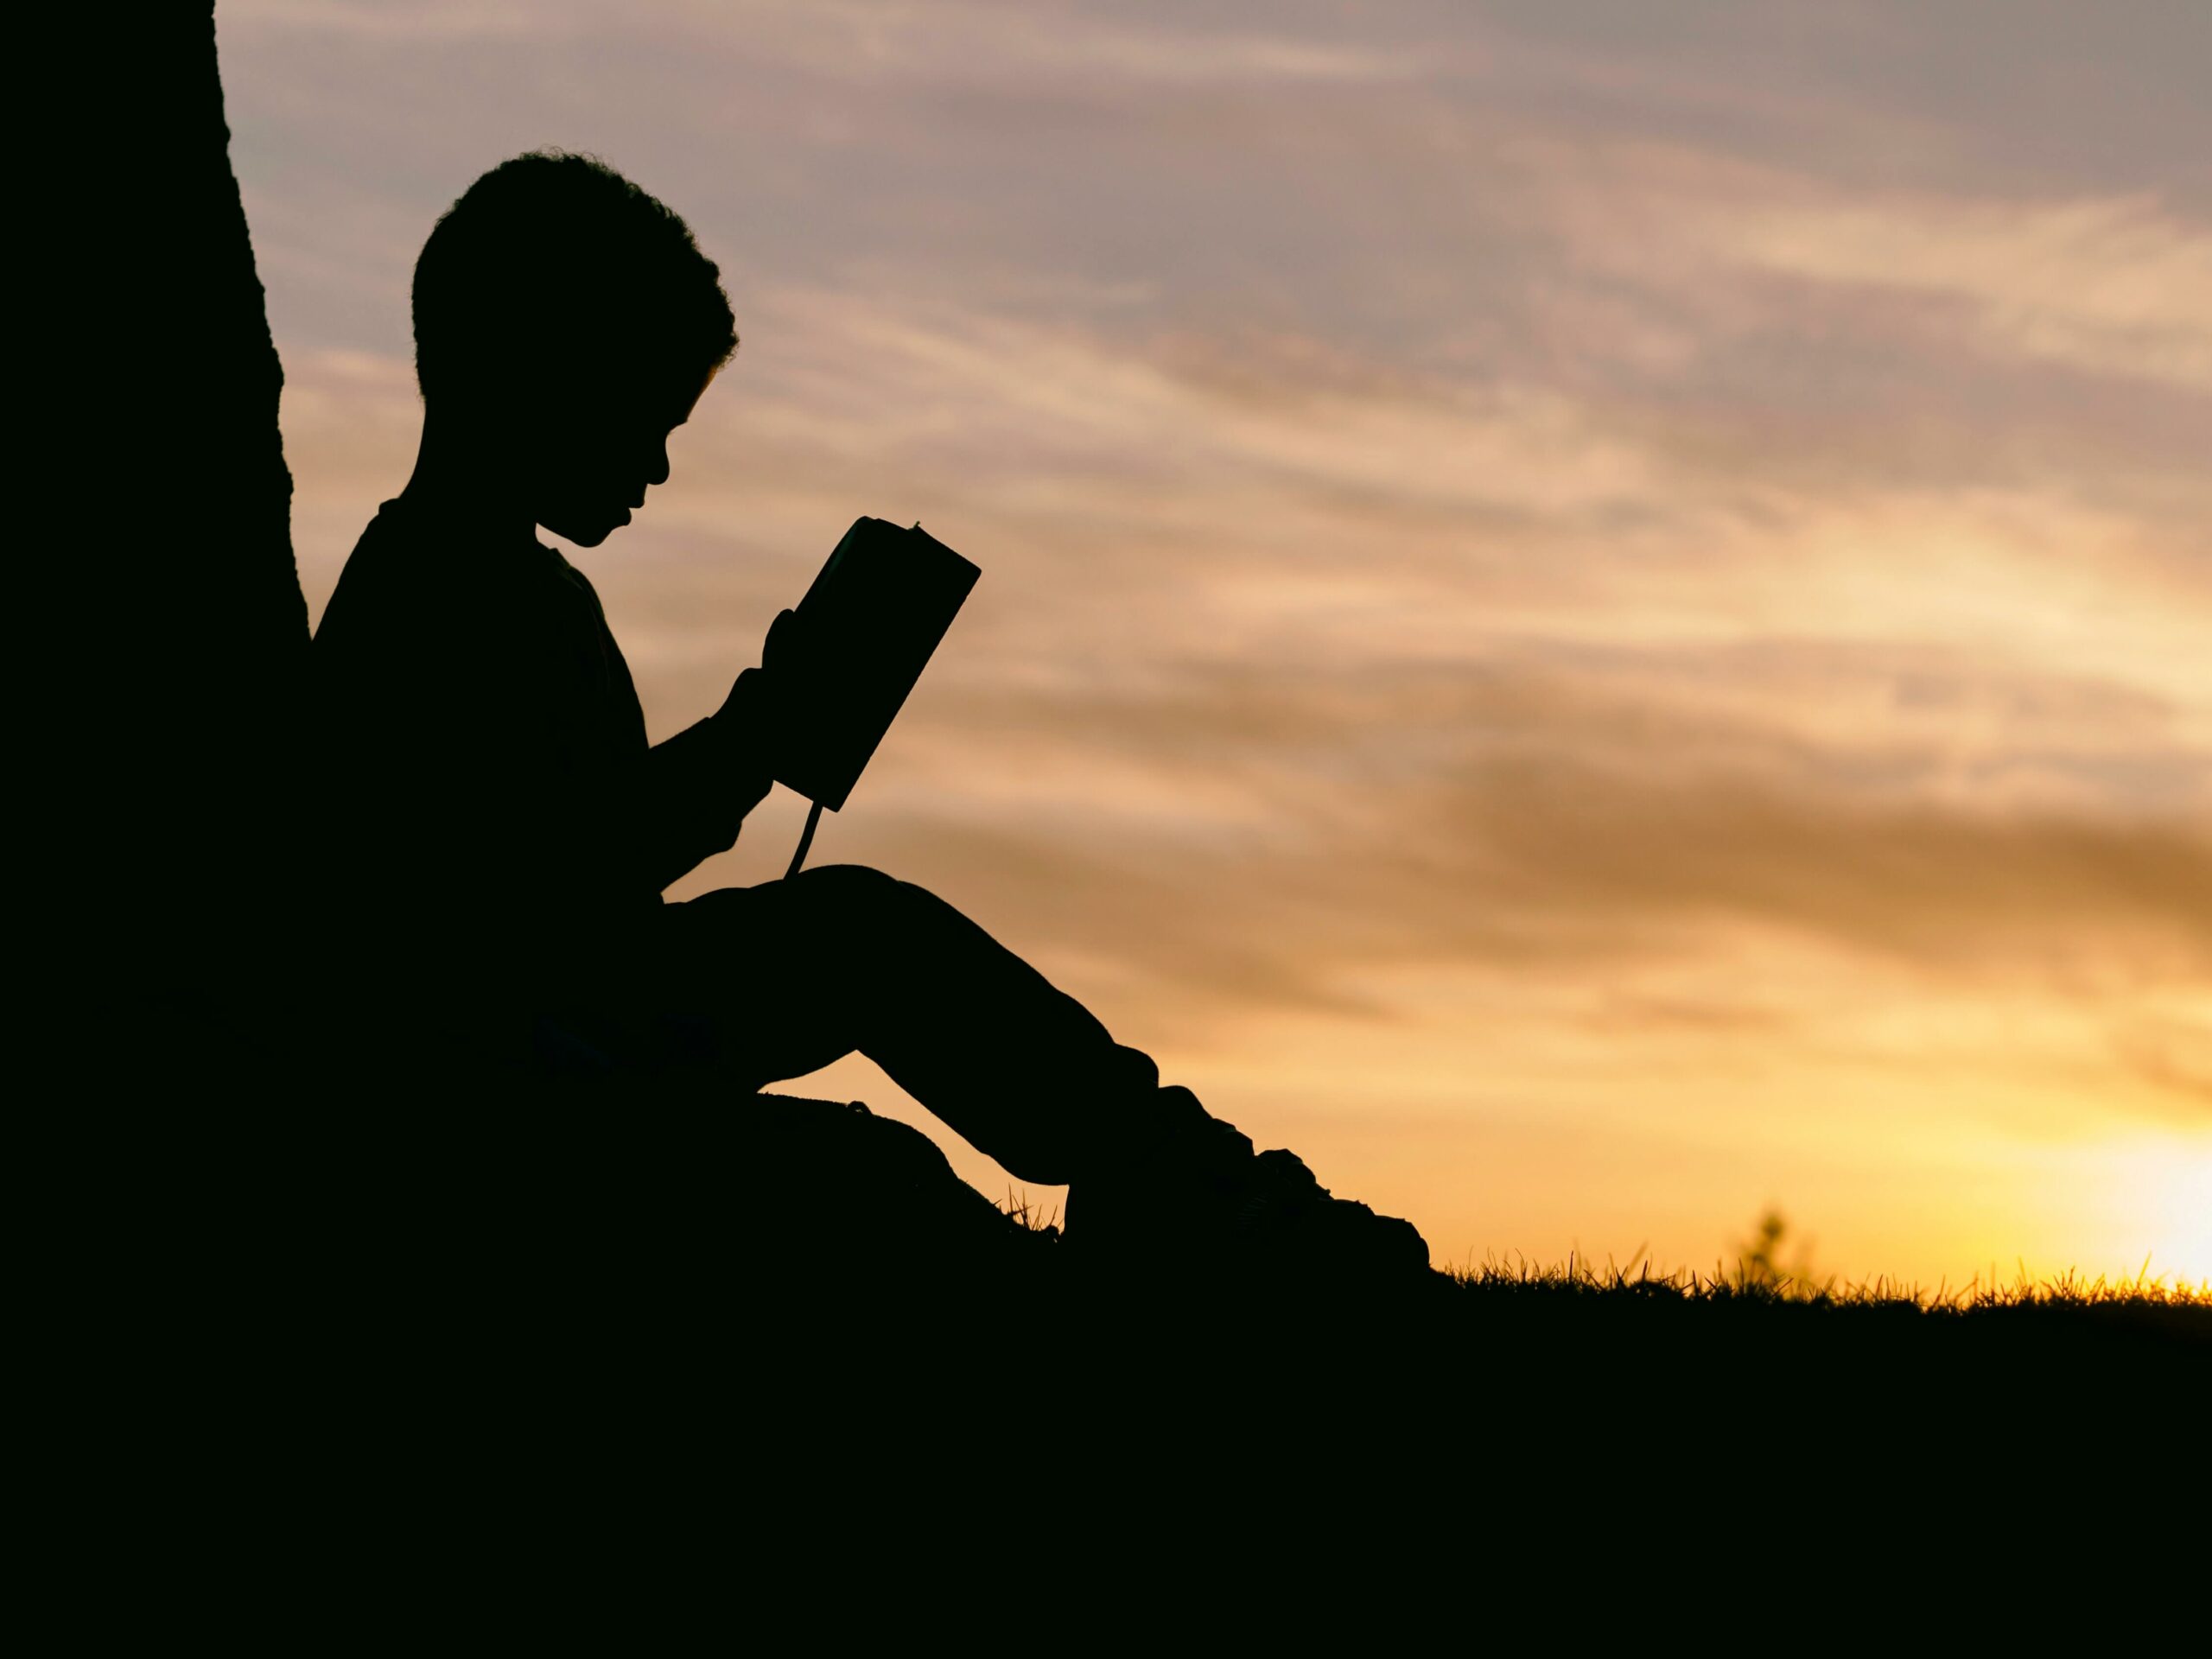 Silhouette of young boy reading against a tree at sunset